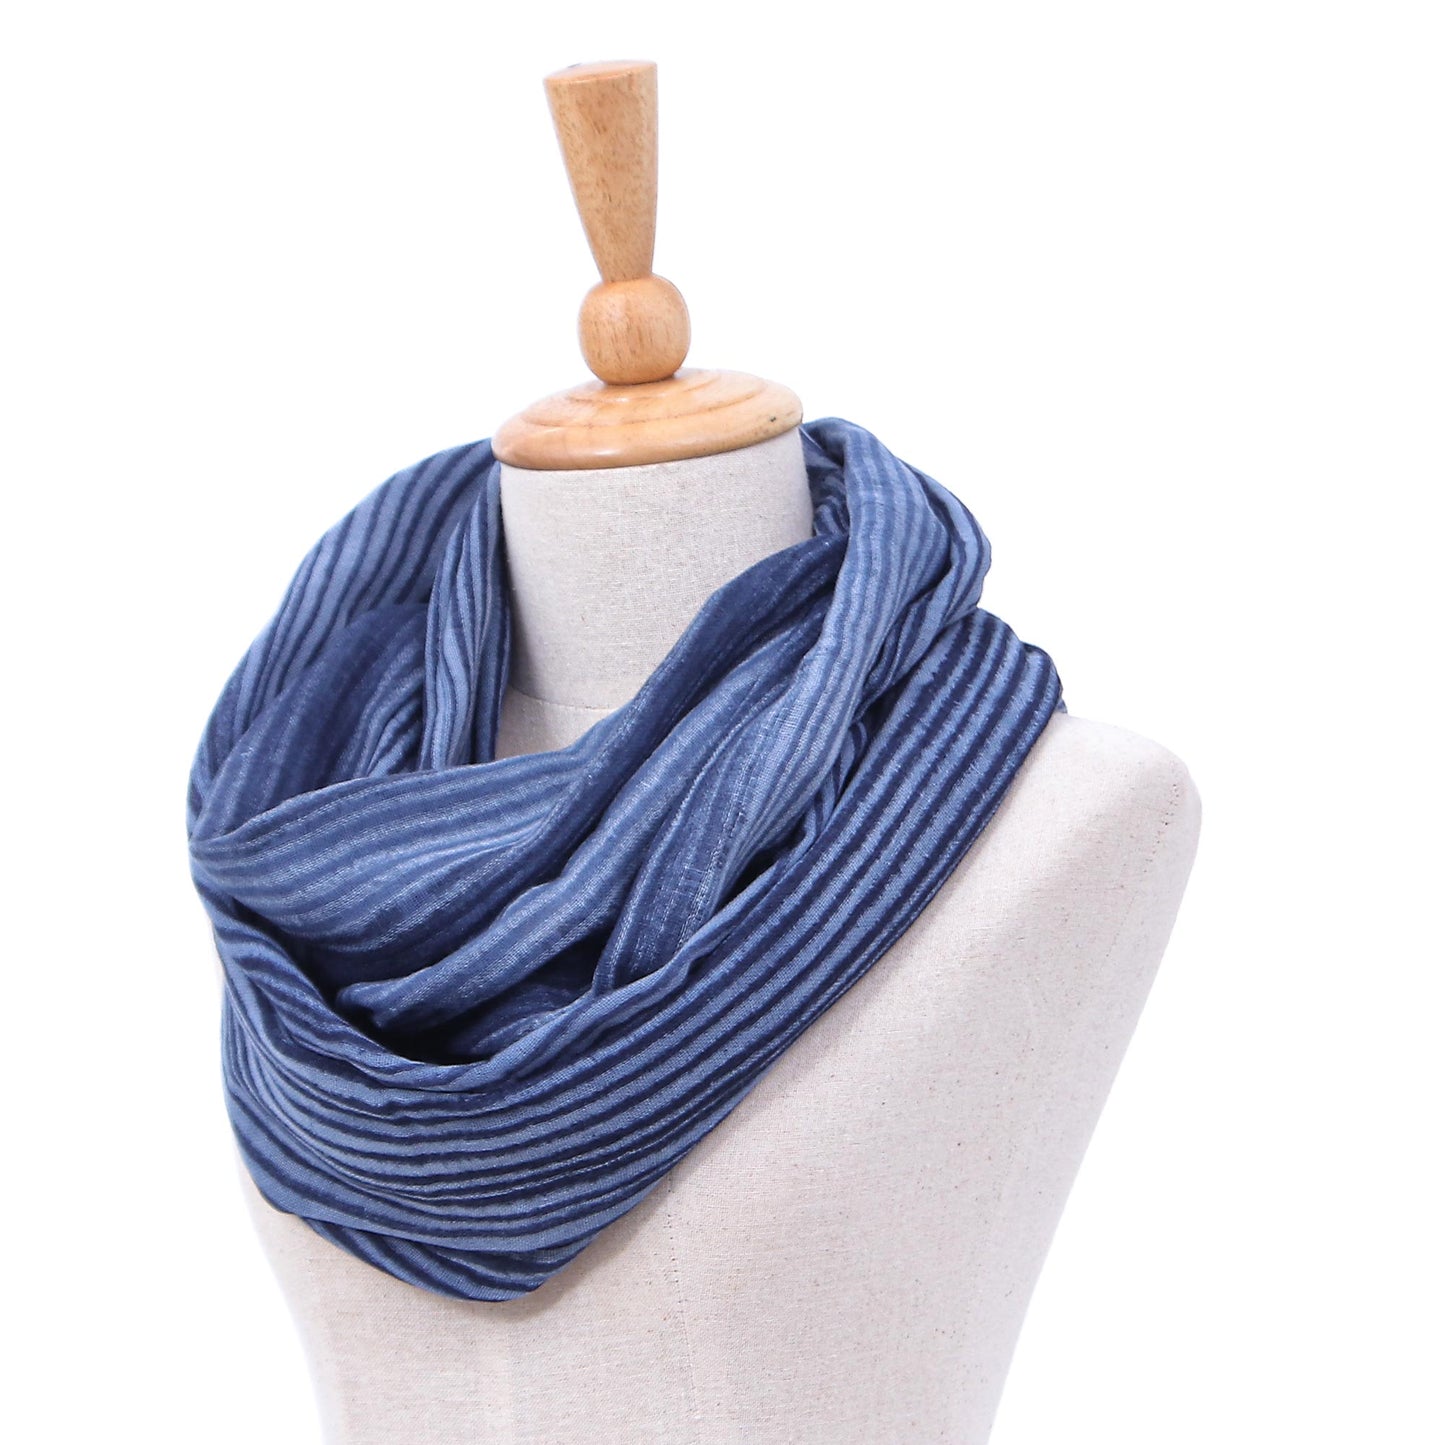 Foggy Night Dark Blue and White 100% Cotton Infinity Scarf from Thailand